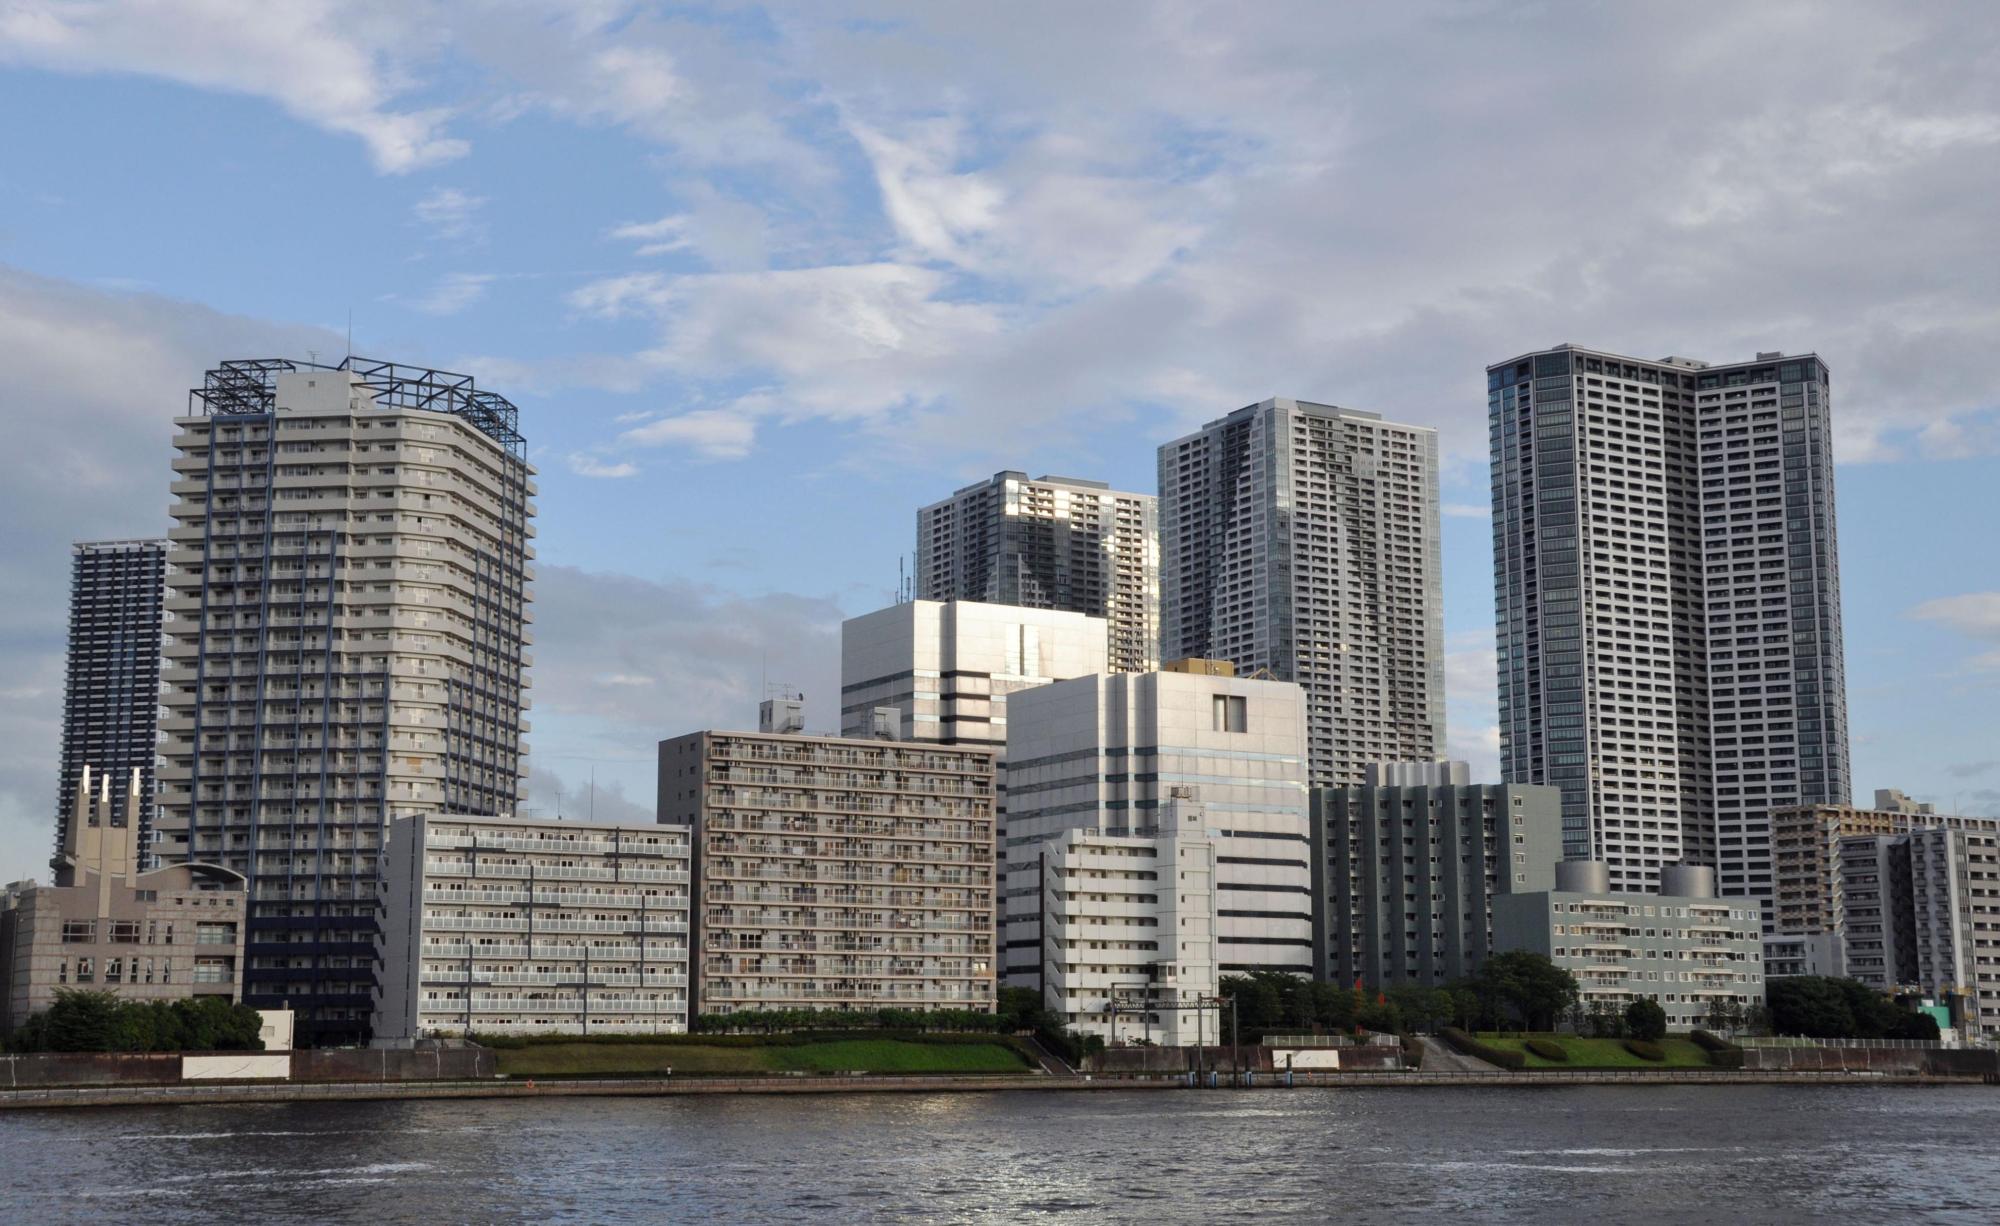 Police are trying to close security gaps related to the high-rise buildings lining Tokyo's waterfront ahead of the 2020 Games. | KYODO